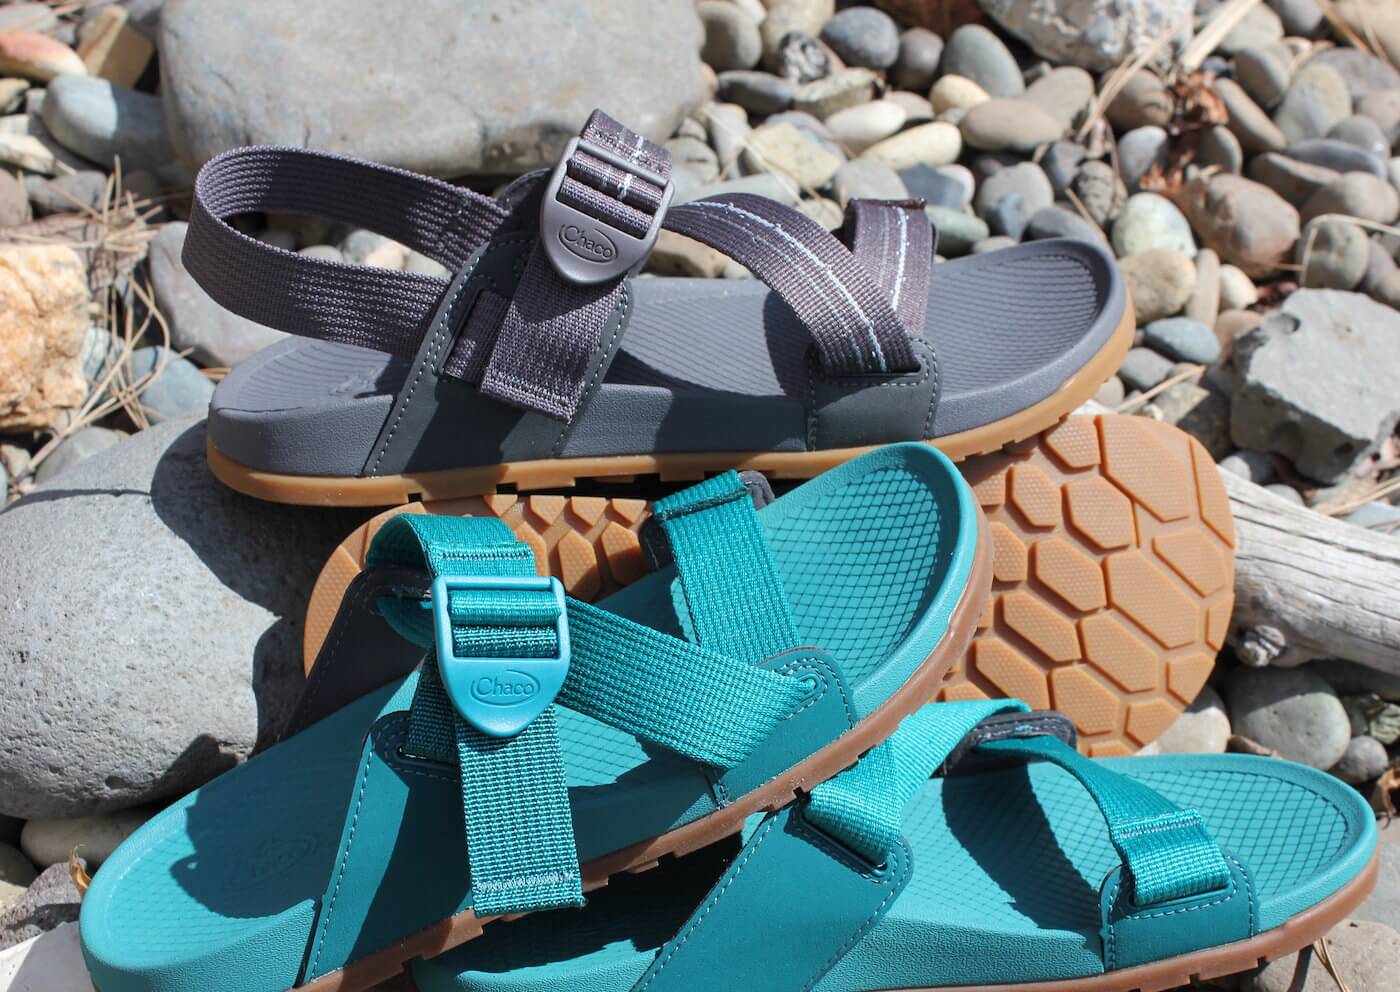 Chaco Lowdown Sandals Review: 'Lighter 